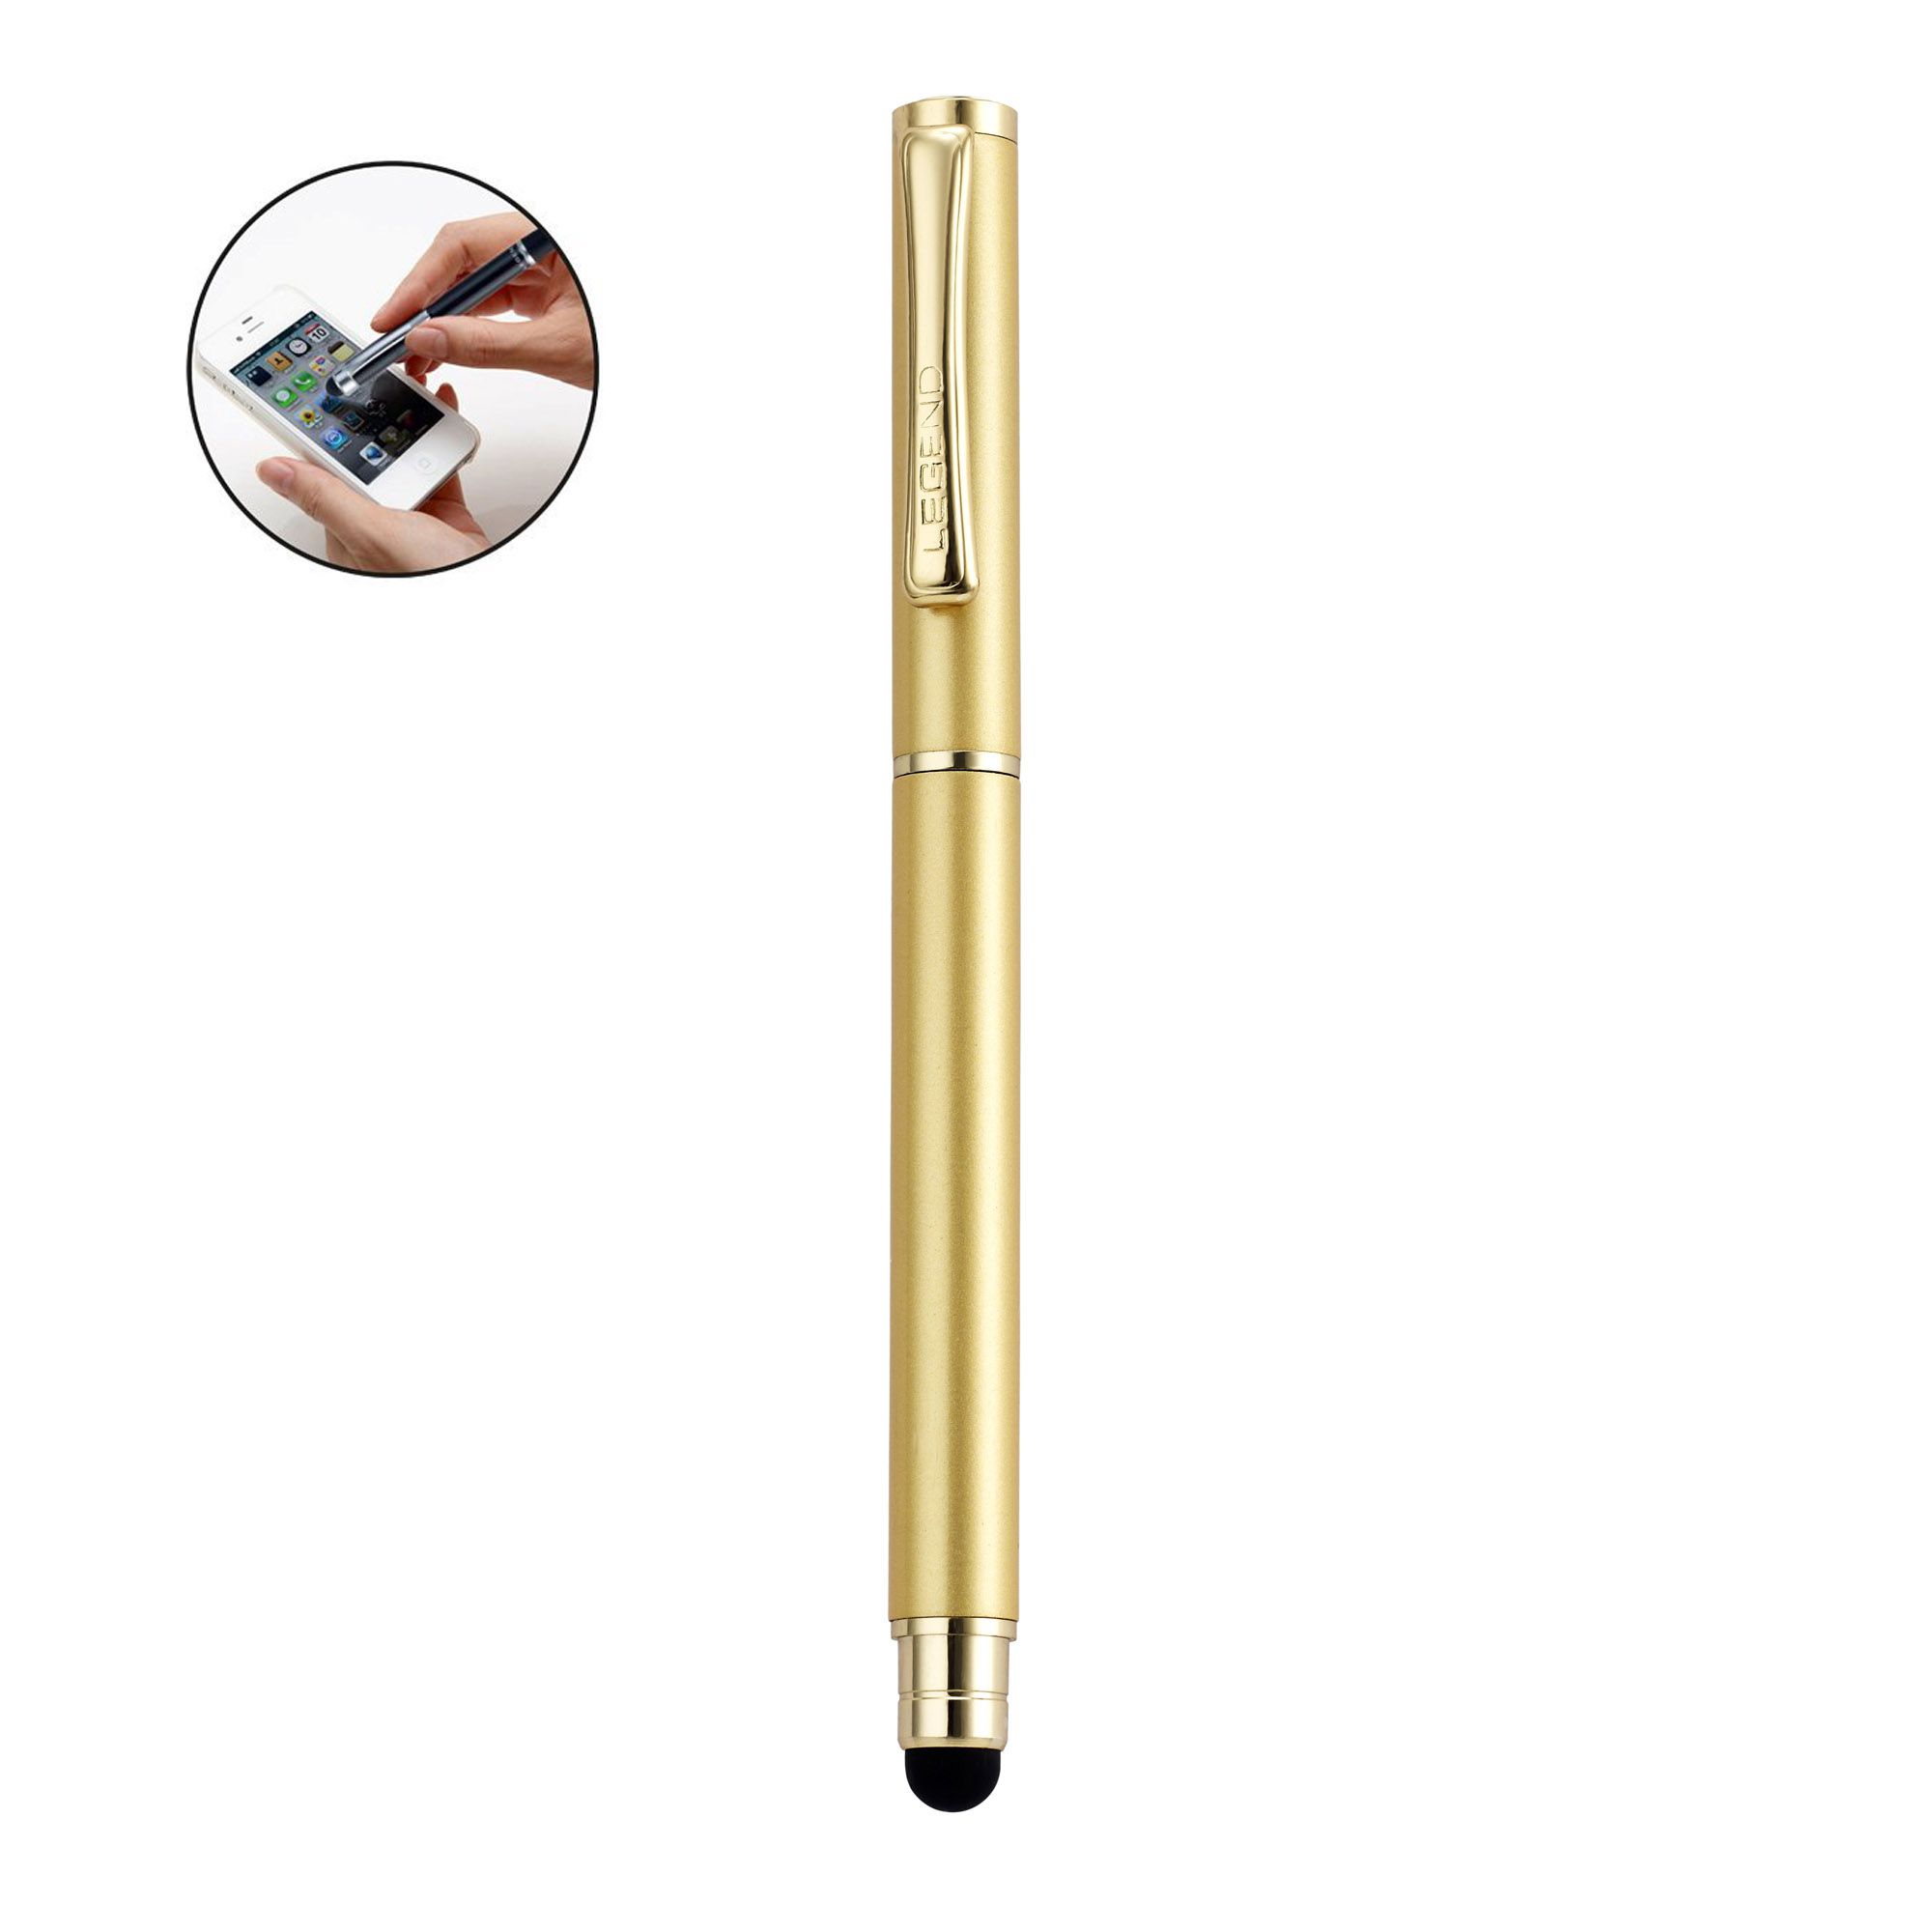     			Legend Divine Ball Pen 2 in 1 Capacitive Stylus Pen (Golden) For Android Phones & Tablets Touch screen